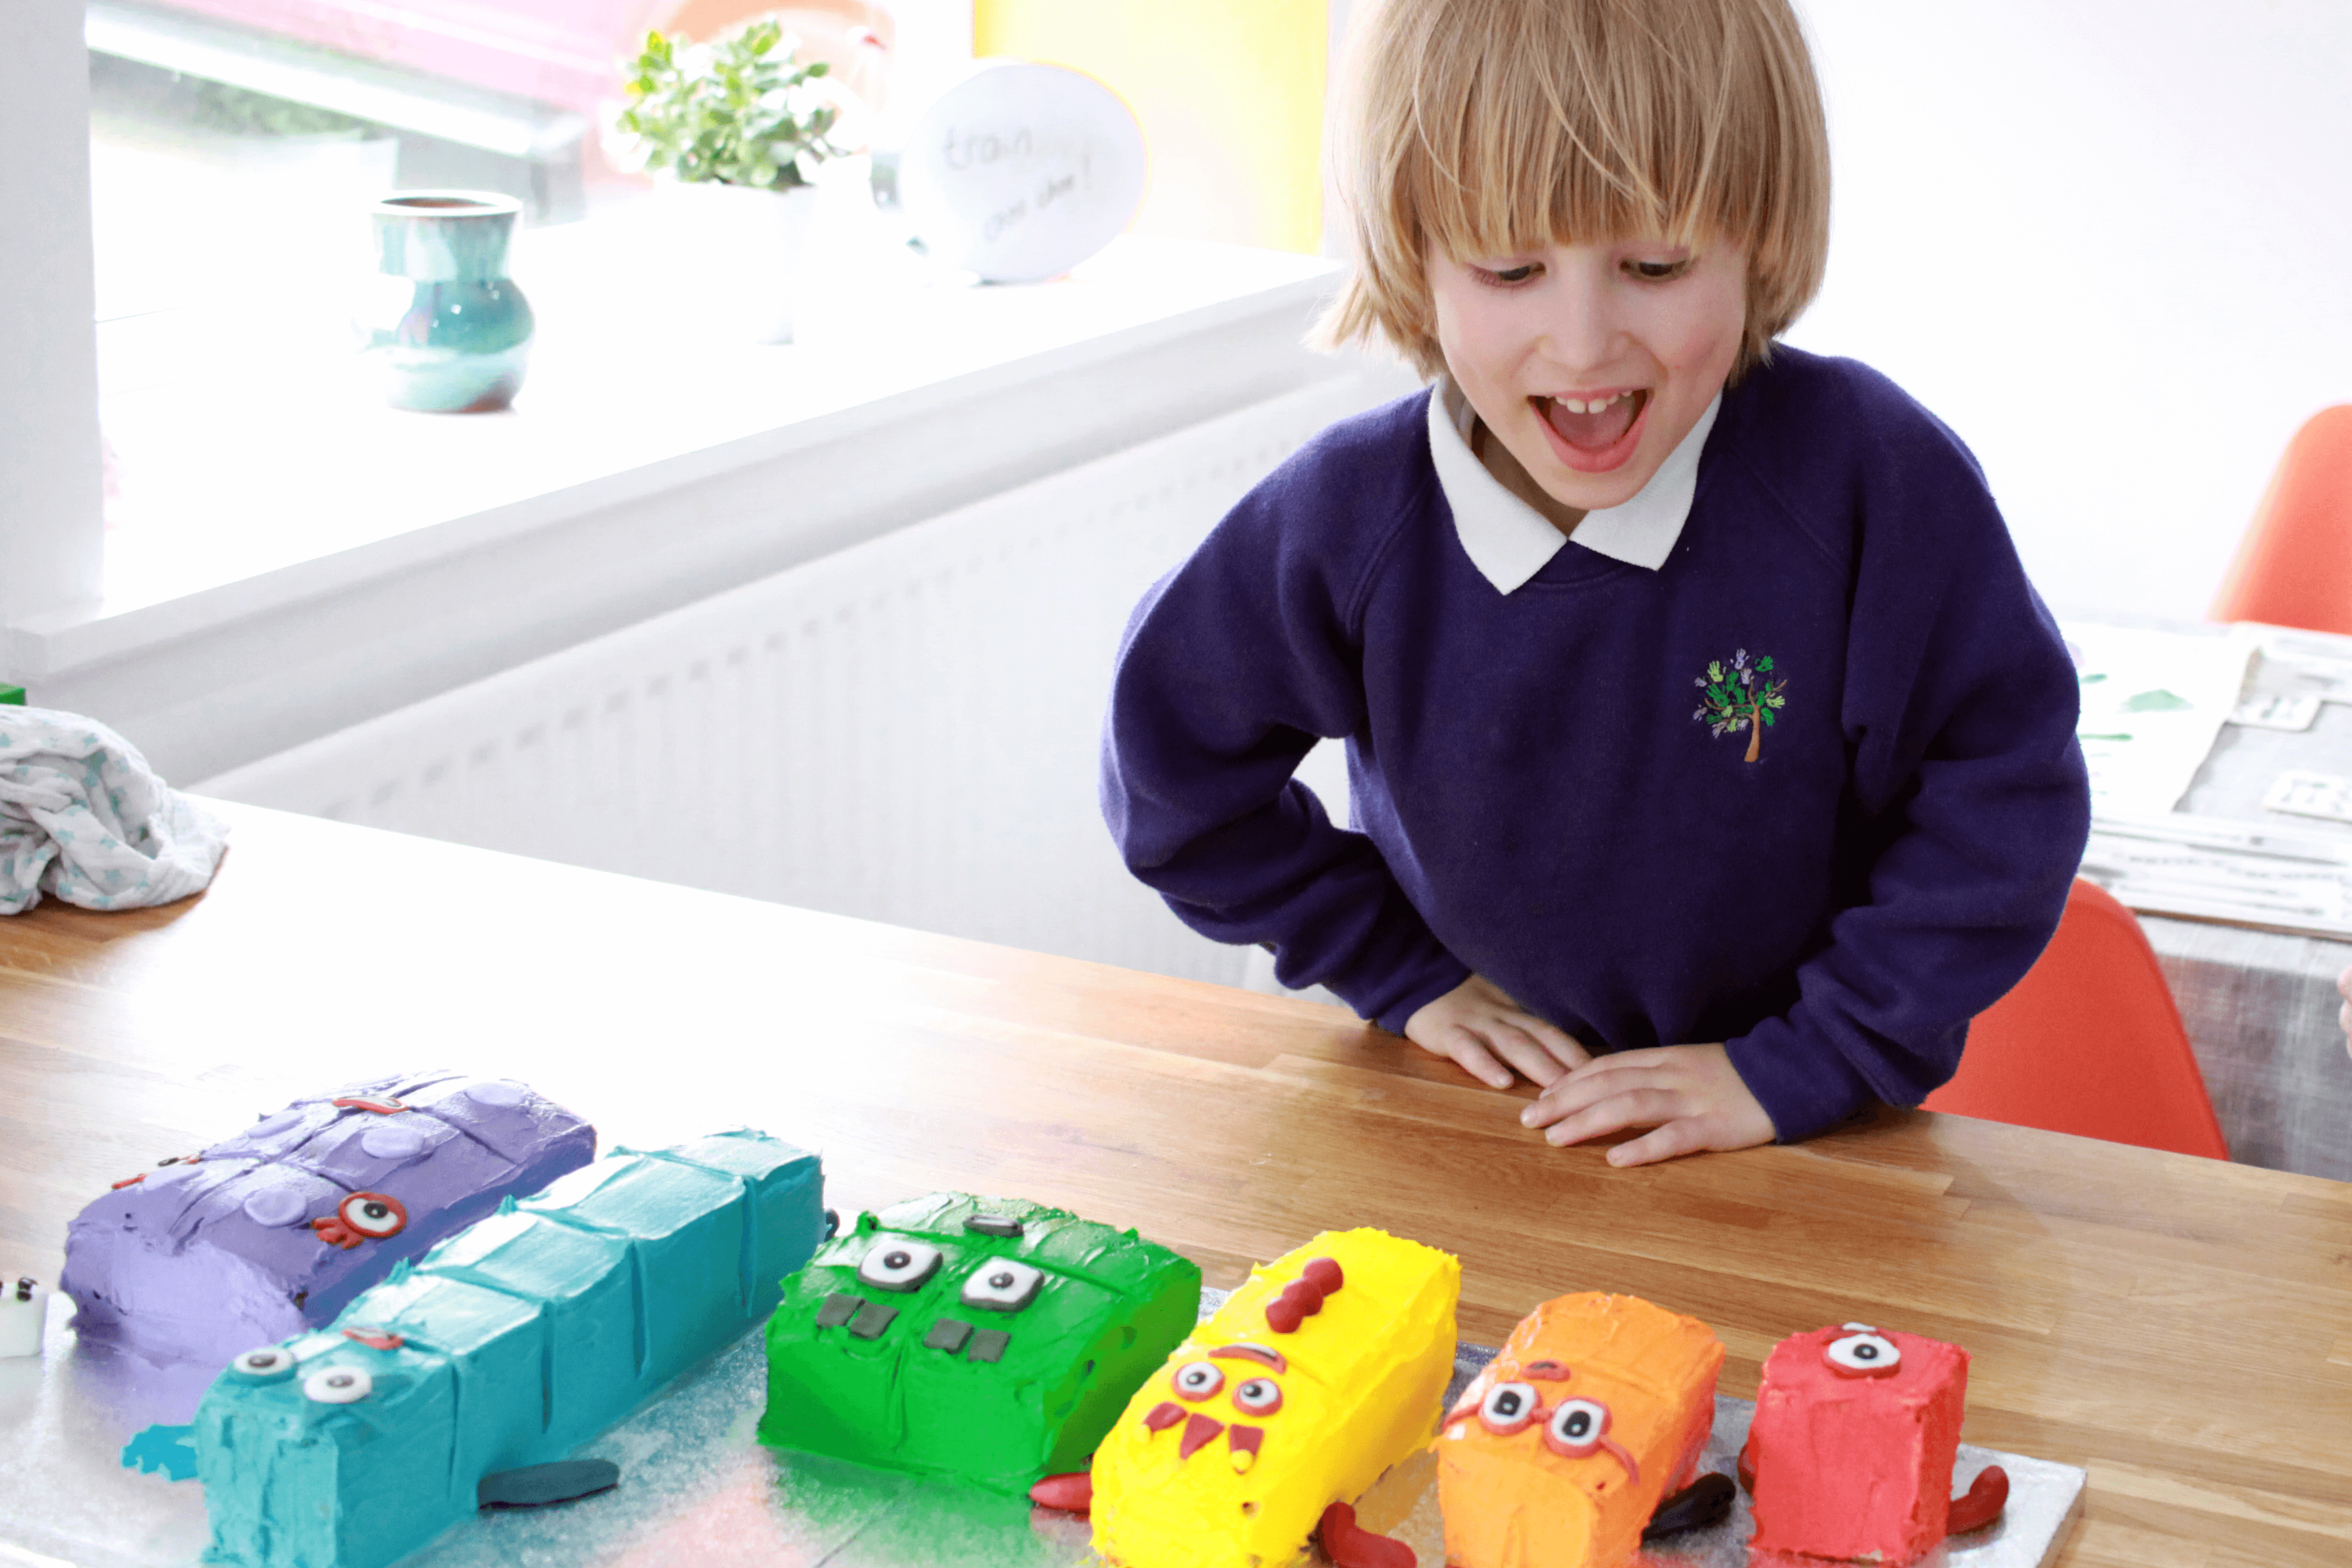 Toby seeing his Numberblocks birthday cake for the first time